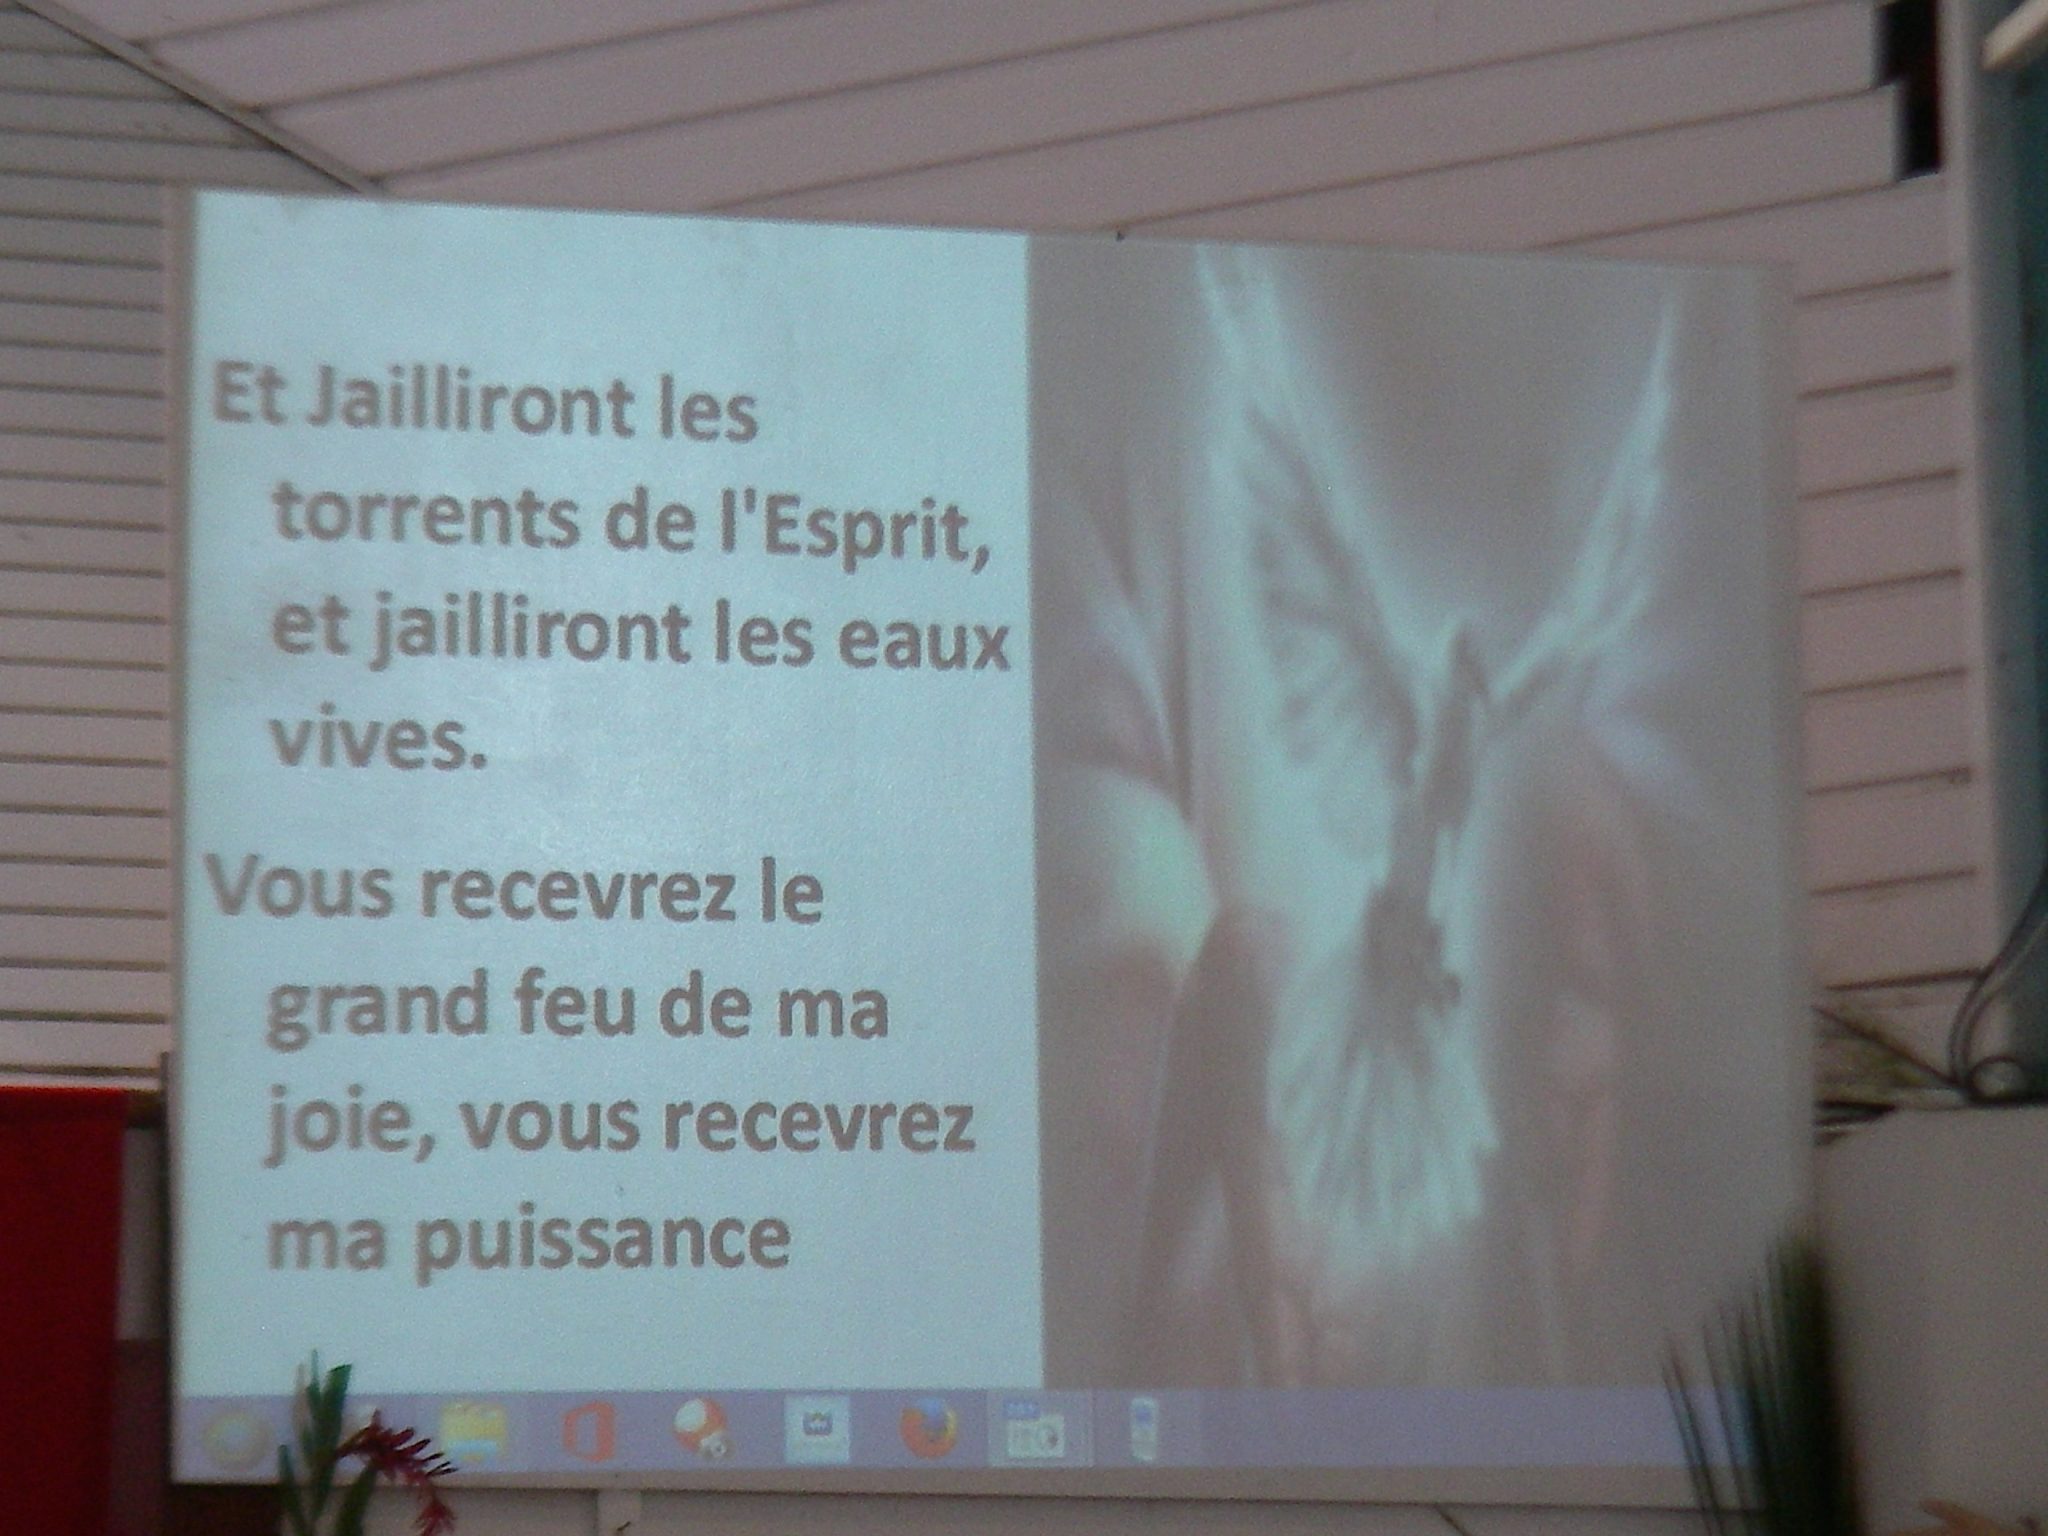 34. The church service was conducted in both French and Polynesian languages.